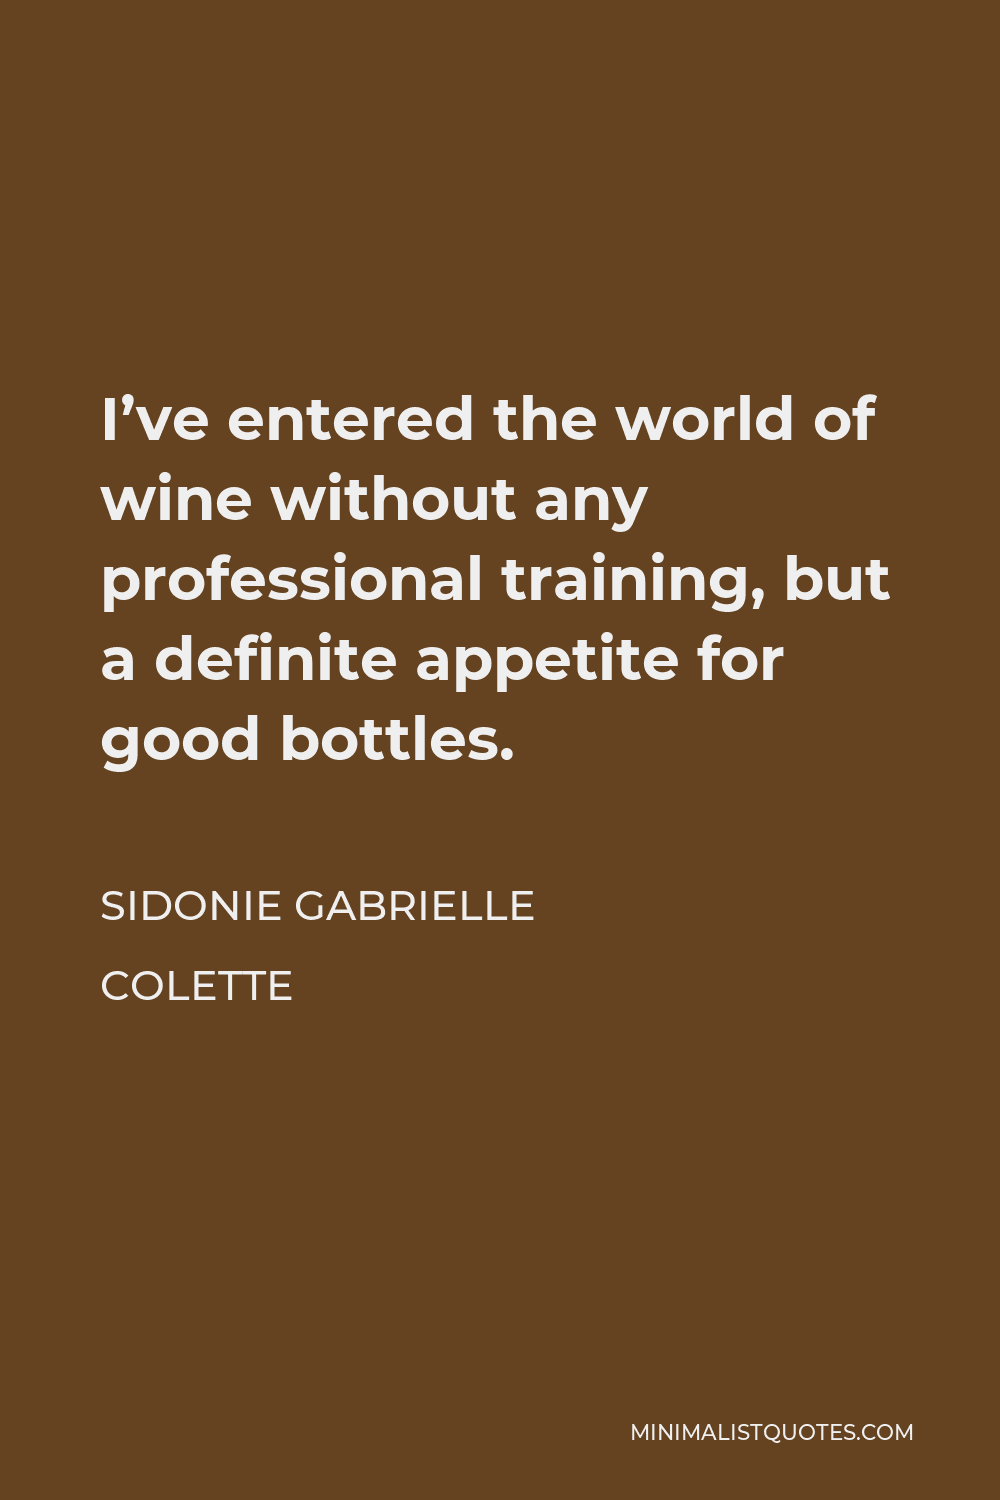 Sidonie Gabrielle Colette Quote - I’ve entered the world of wine without any professional training, but a definite appetite for good bottles.